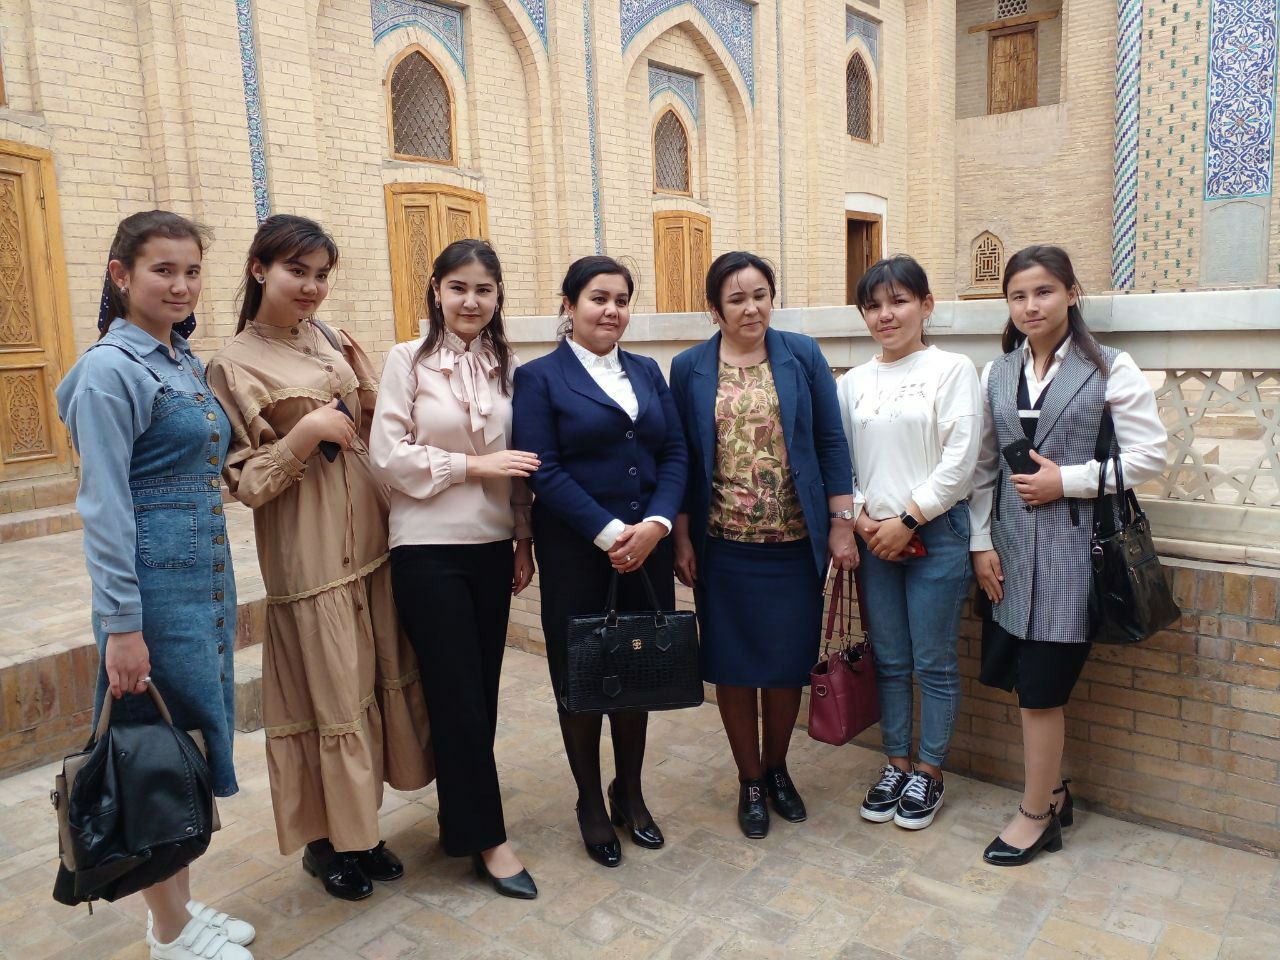 Our students traveled to Khiva